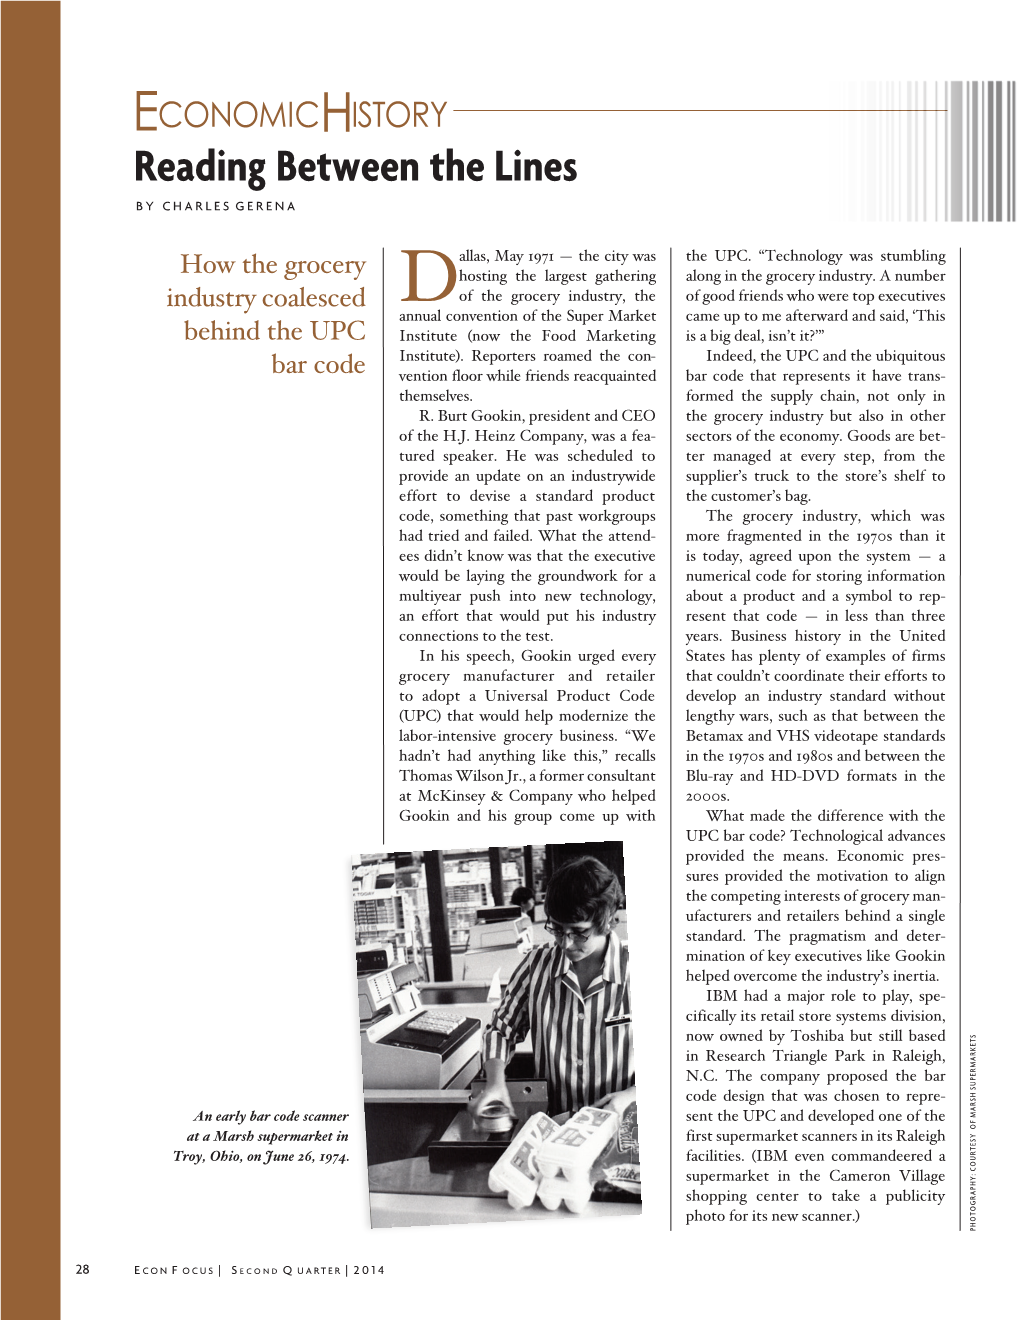 Reading Between the Lines by Charles Gerena